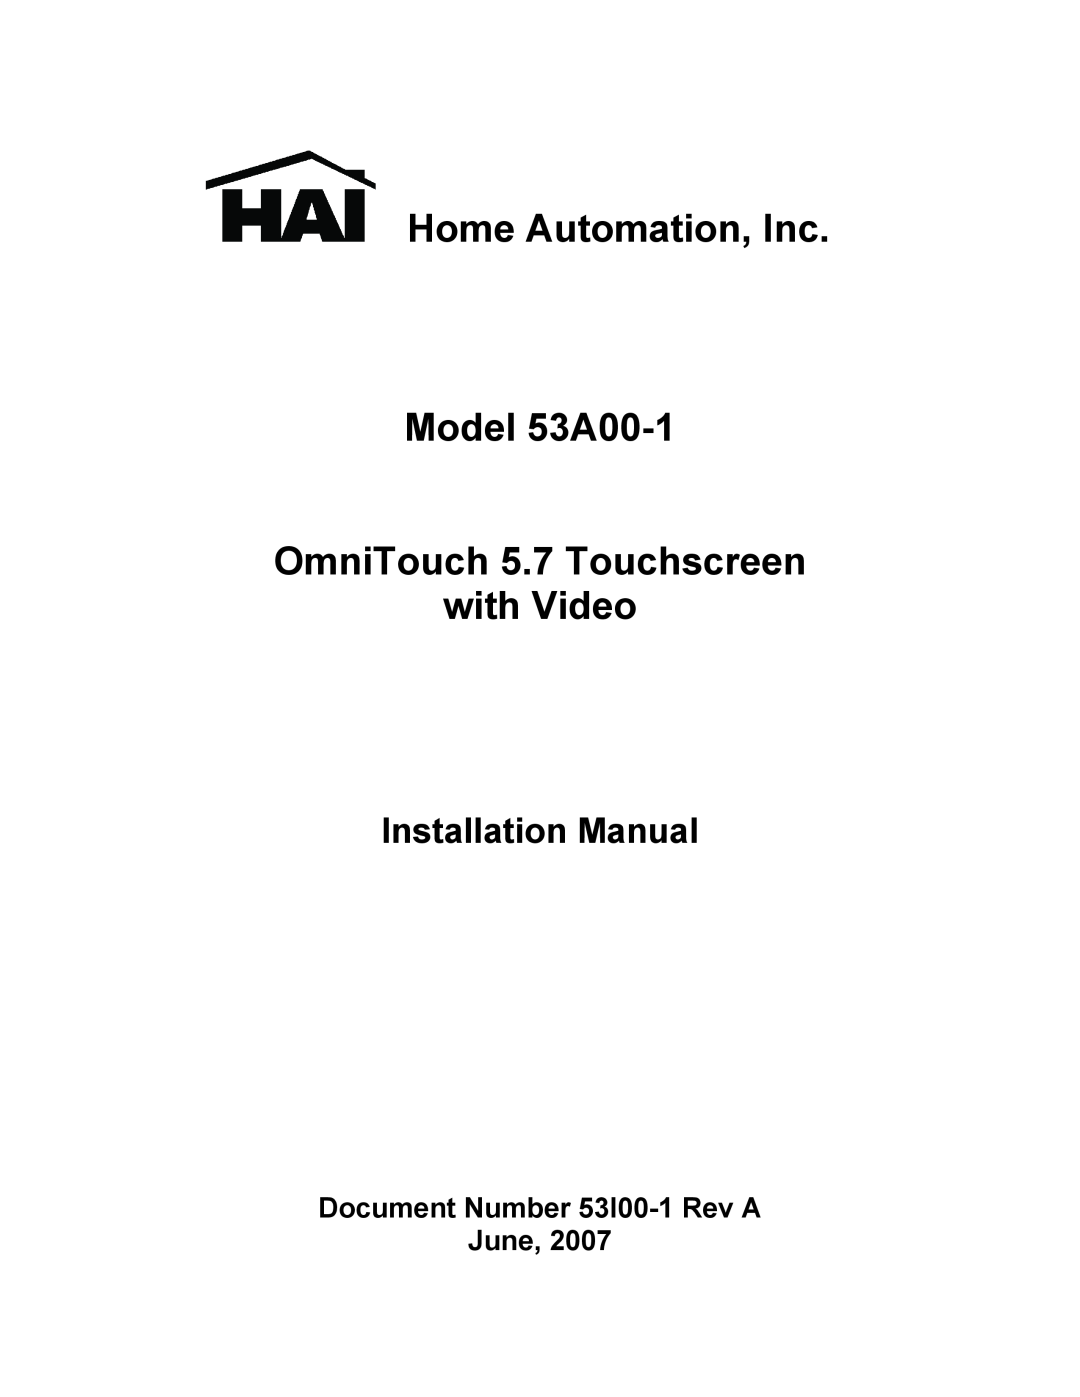 Home Automation installation manual Home Automation, Inc, Model 53A00-1 OmniTouch 5.7 Touchscreen, with Video 